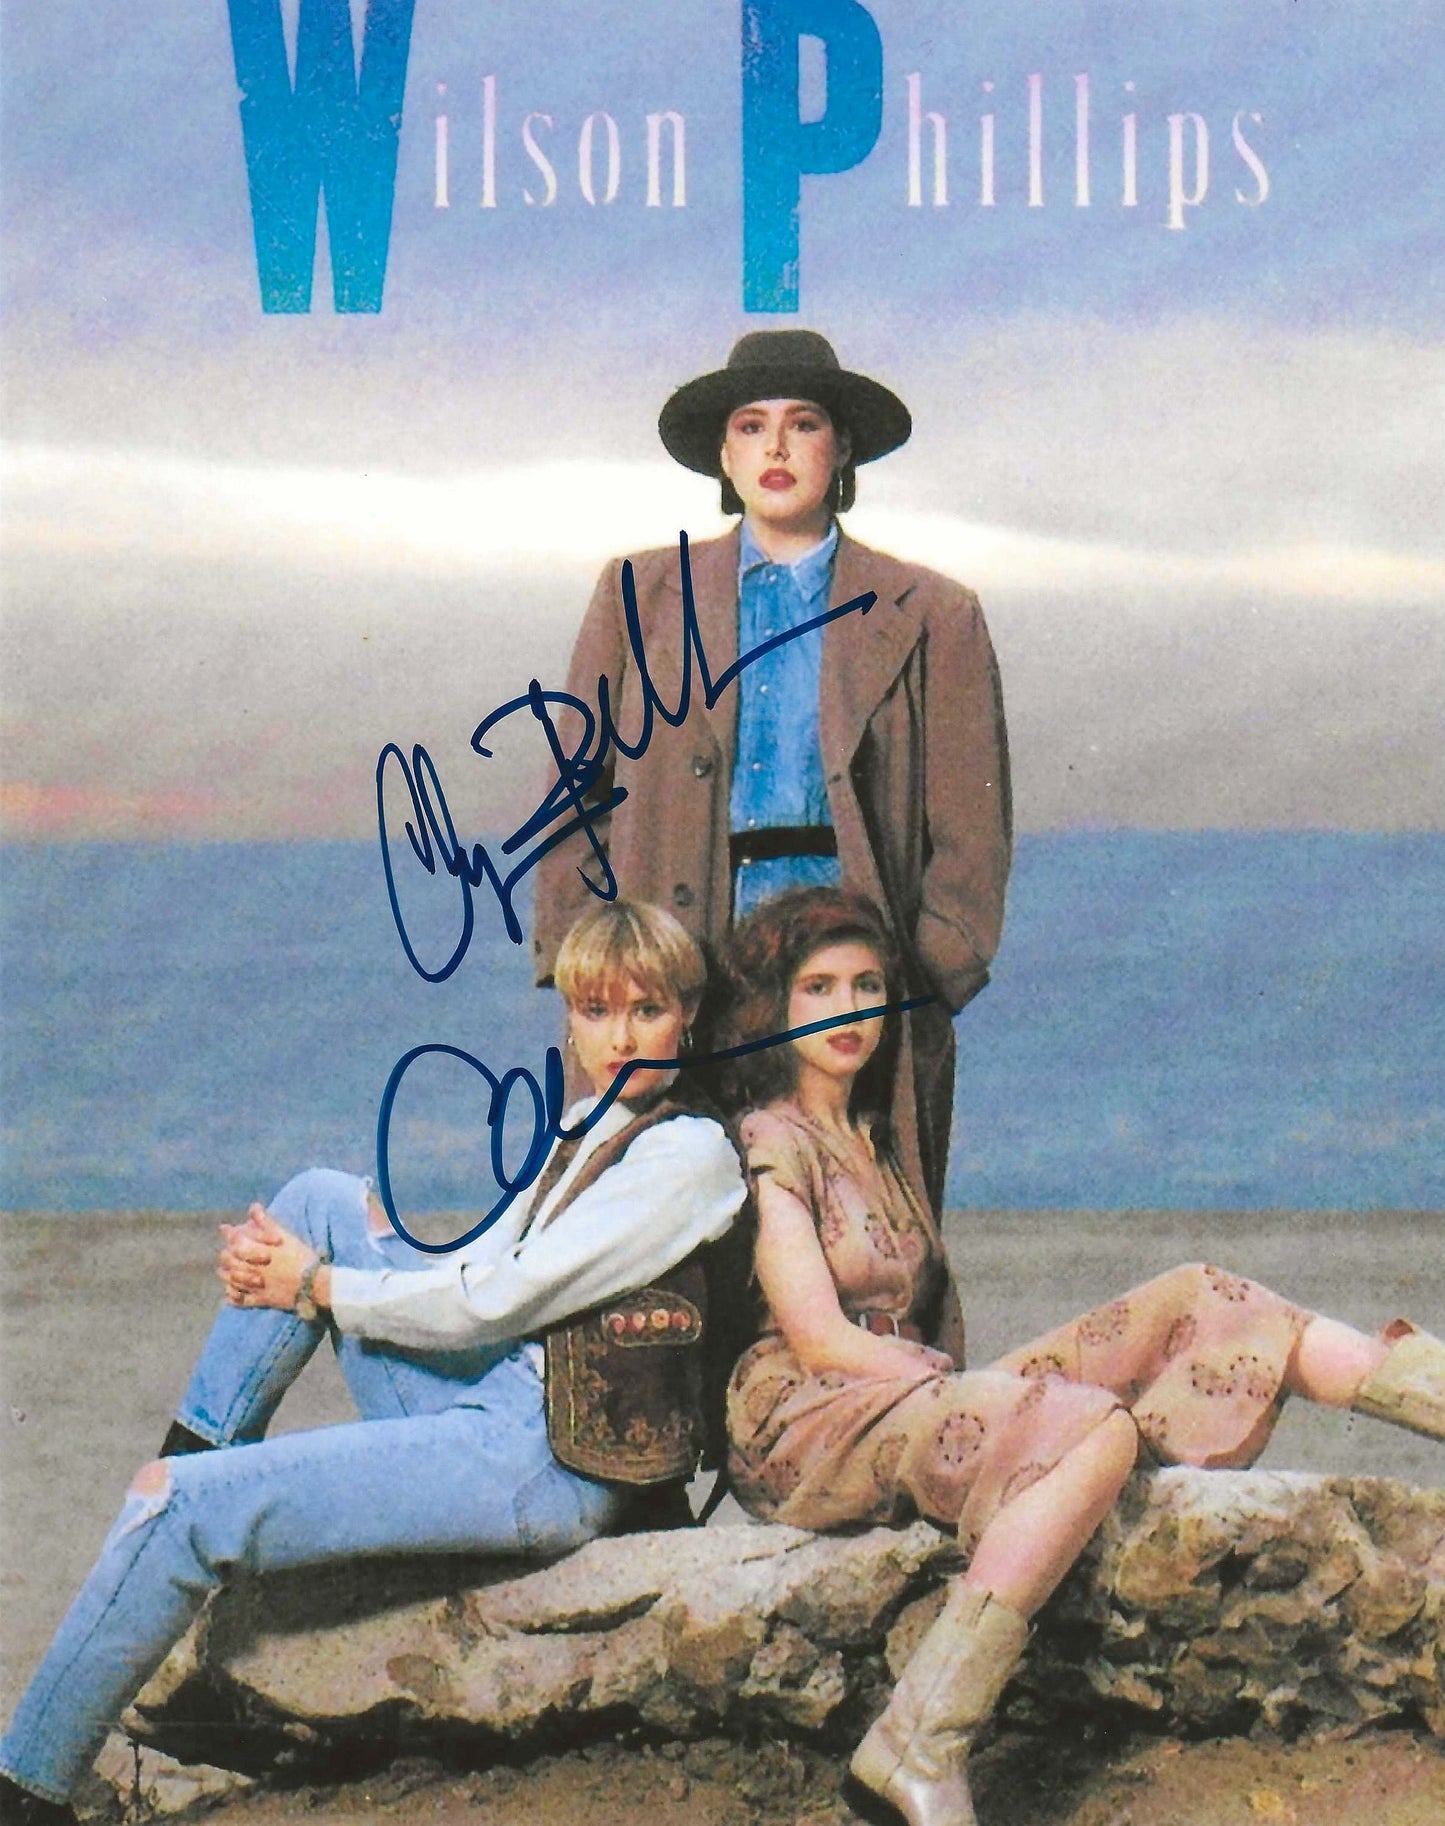 Chynna Phillips Carnie Wilson Autographed Signed "WILSON PHILLIPS" 8X10 Photo Elite Promotions & Graphz Authentication